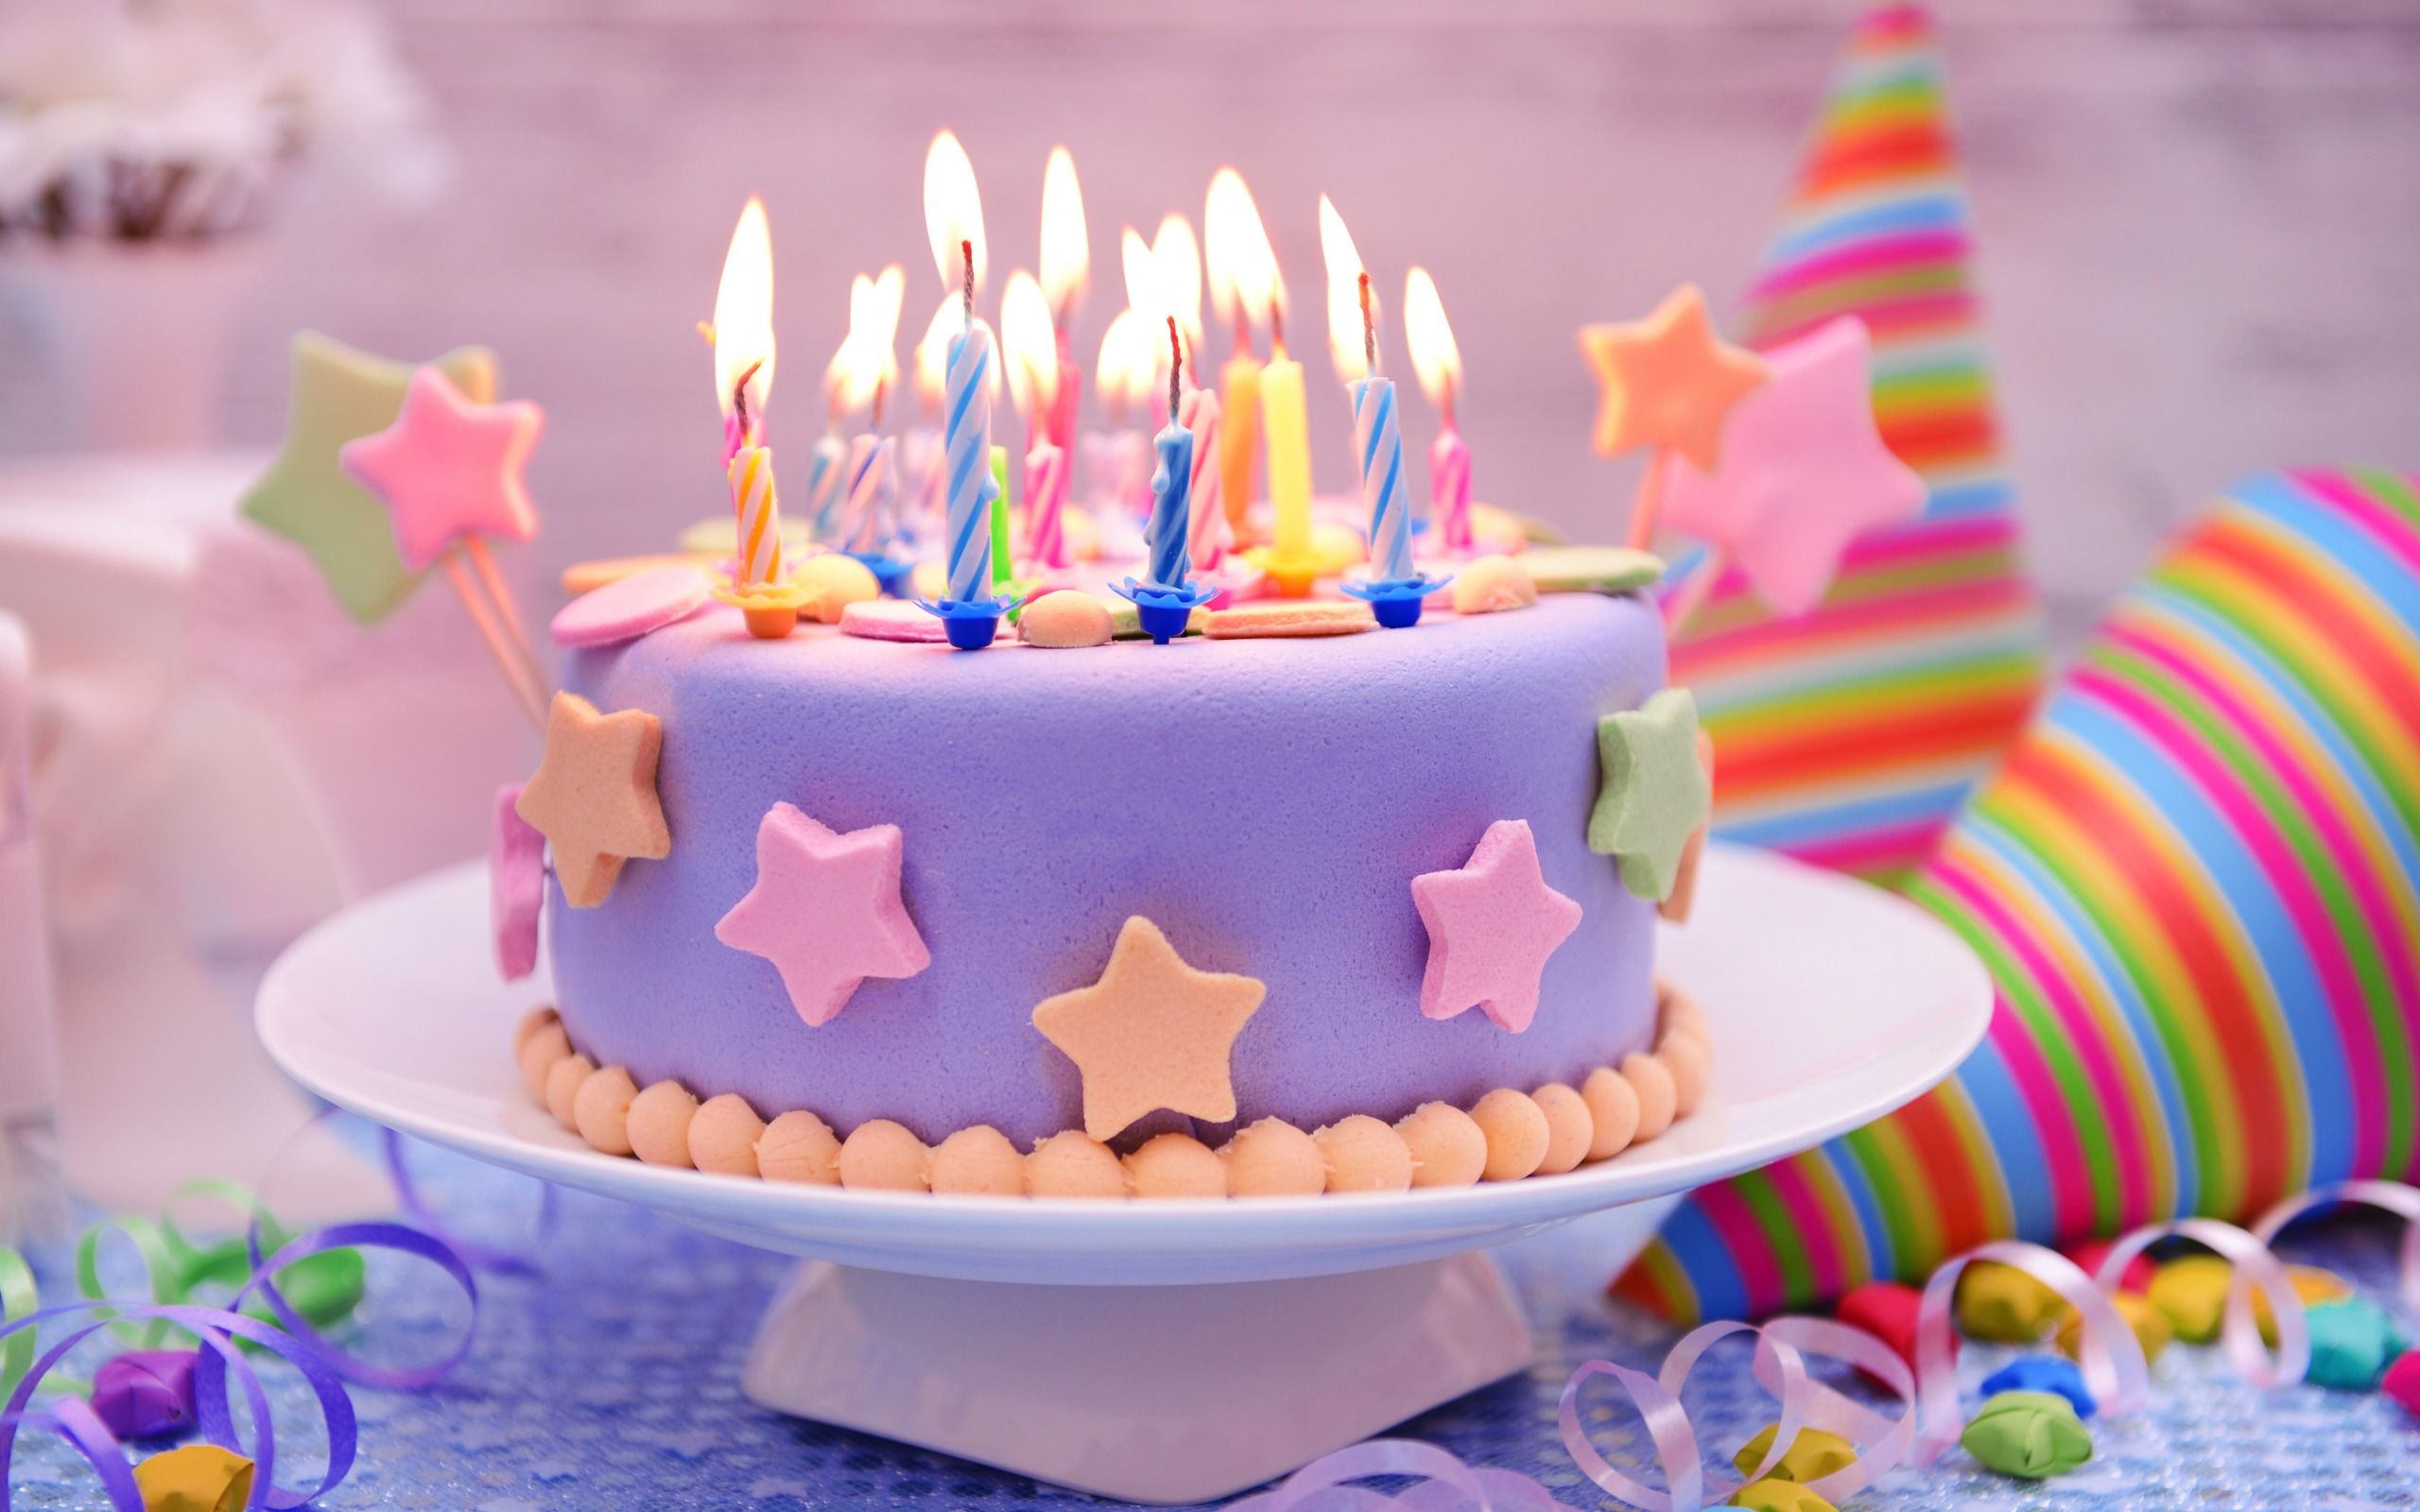 Download wallpaper birthday cake, candles, sweets, cakes and pastries, happy birthday decoration for desktop with resolution 2560x1600. High Quality HD picture wallpaper